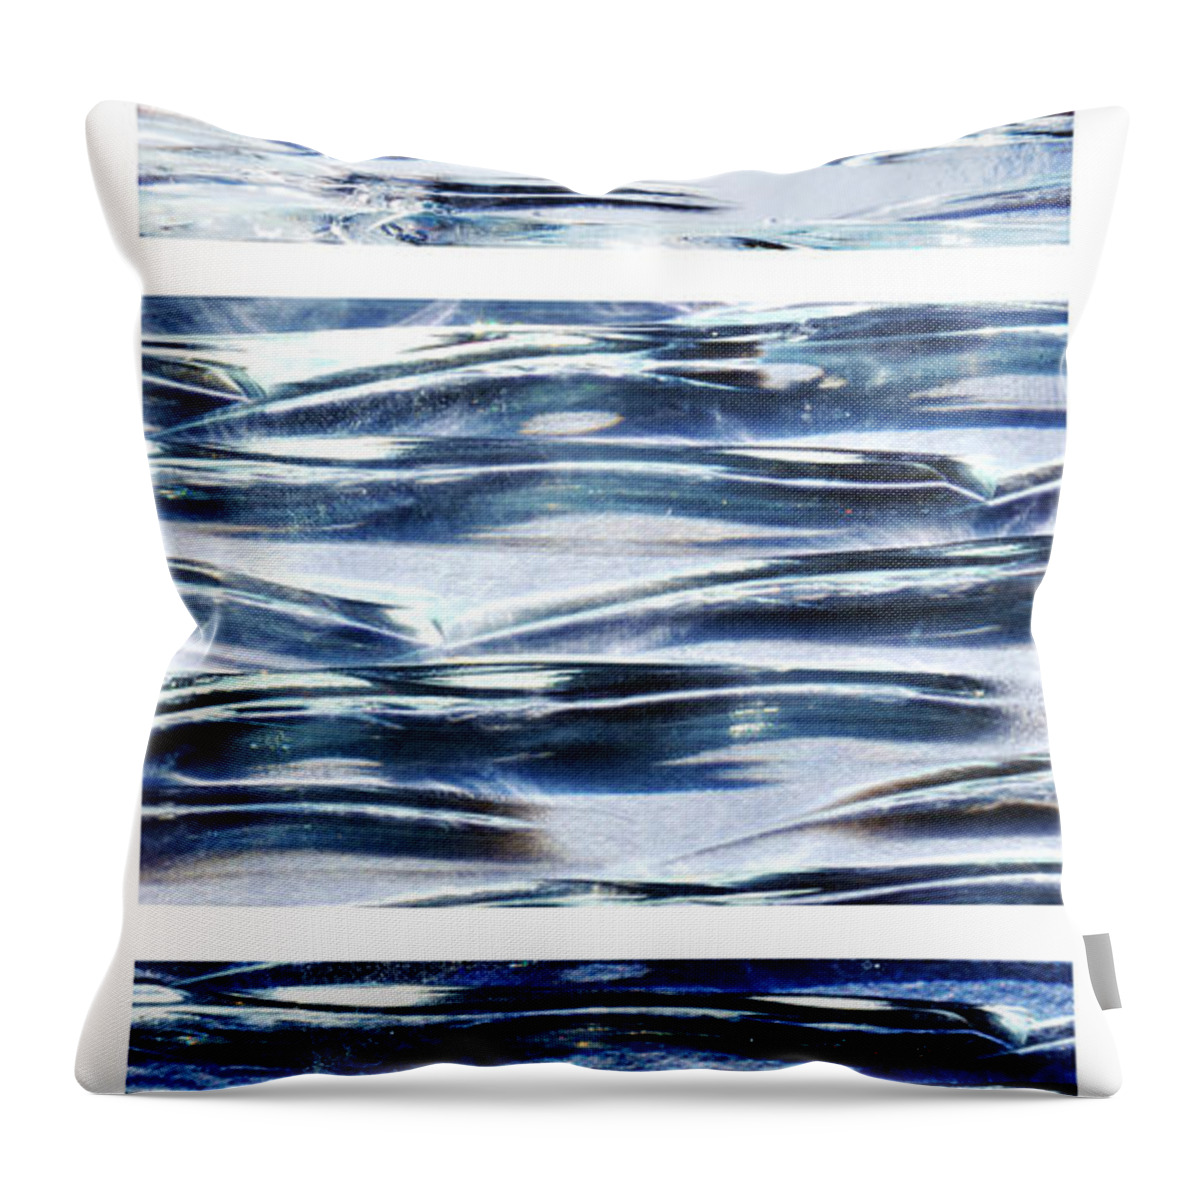 Trio Throw Pillow featuring the photograph Trio In Blue by Wendy Wilton